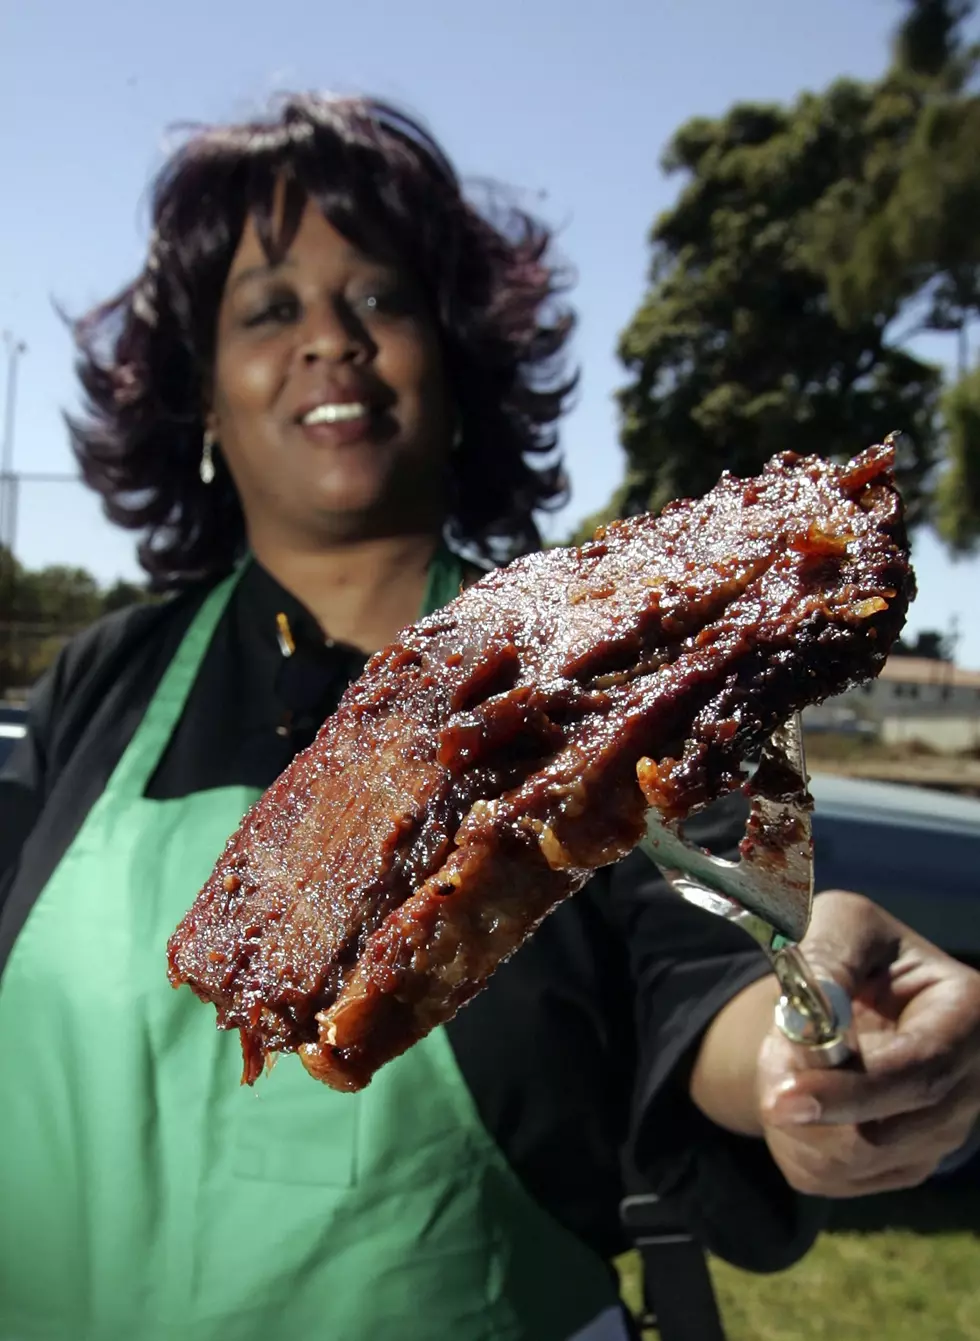 What Is The Best Way To Cook Ribs?